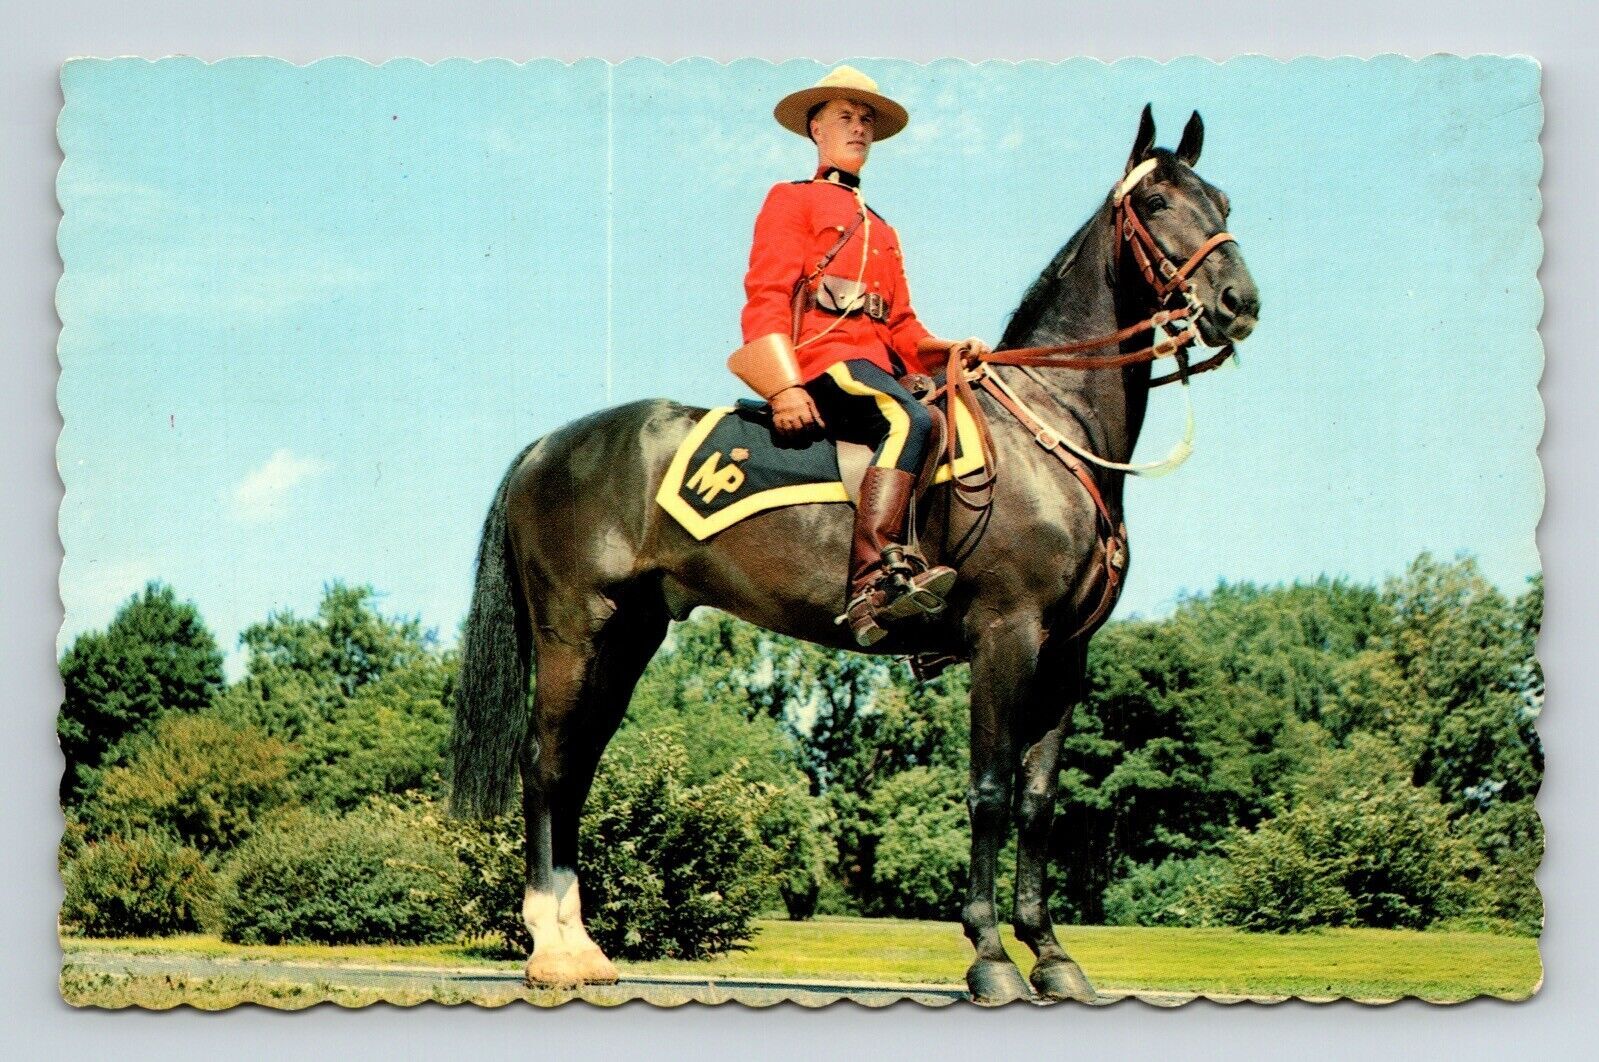 royal-canadian-mounted-police-officer-horse-police-uniform-chrome